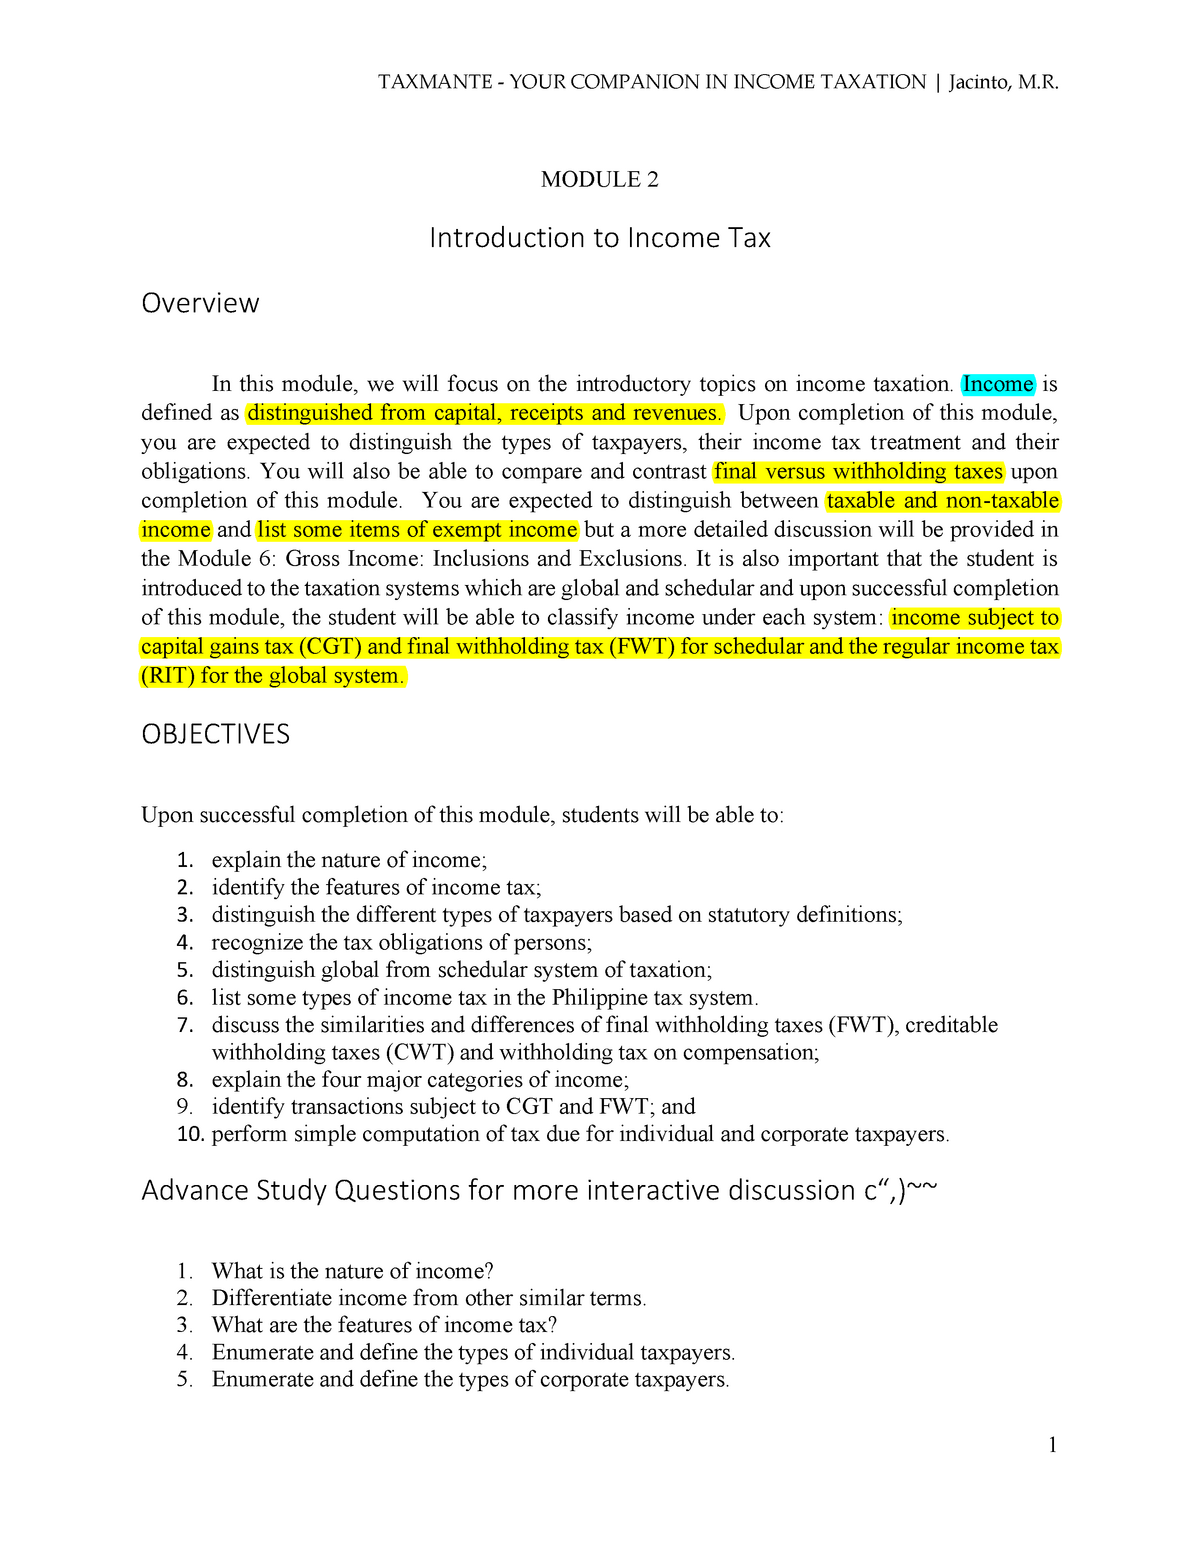 module-2-introduction-to-income-tax-module-2-introduction-to-income